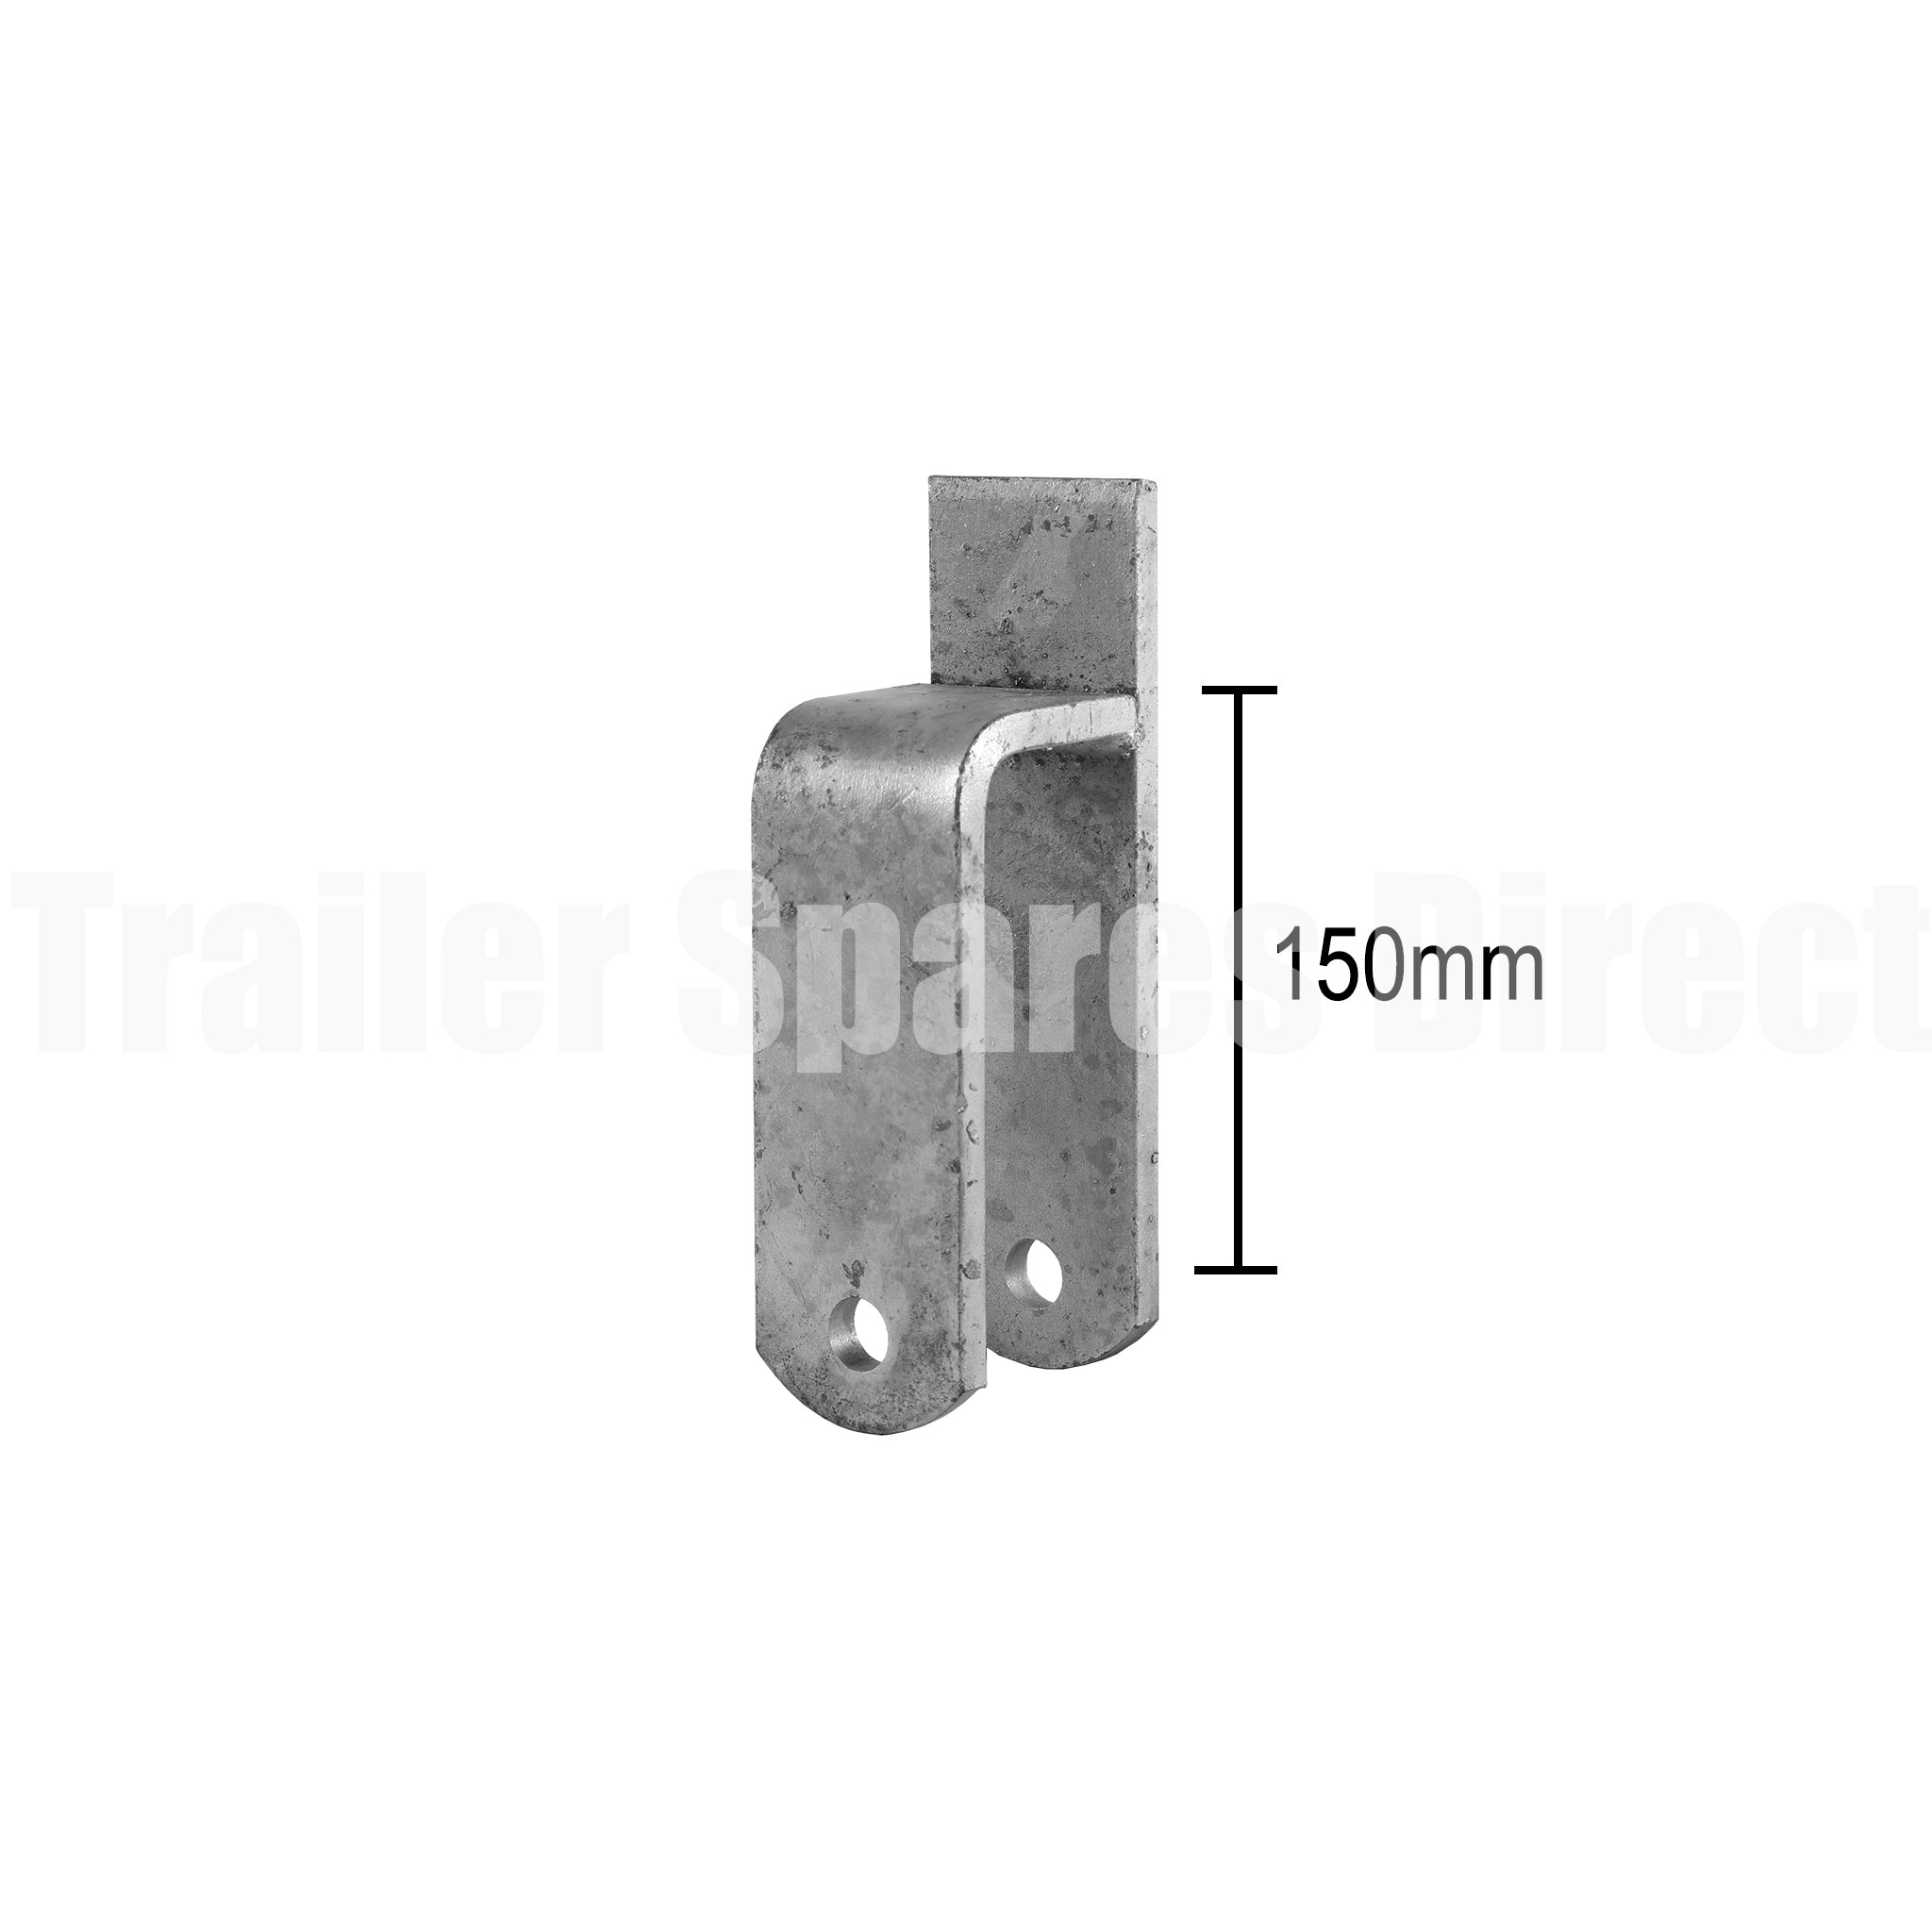 Rocker centre perch heavy duty galvanised for 60mm trailer springs - use with 18mm pin